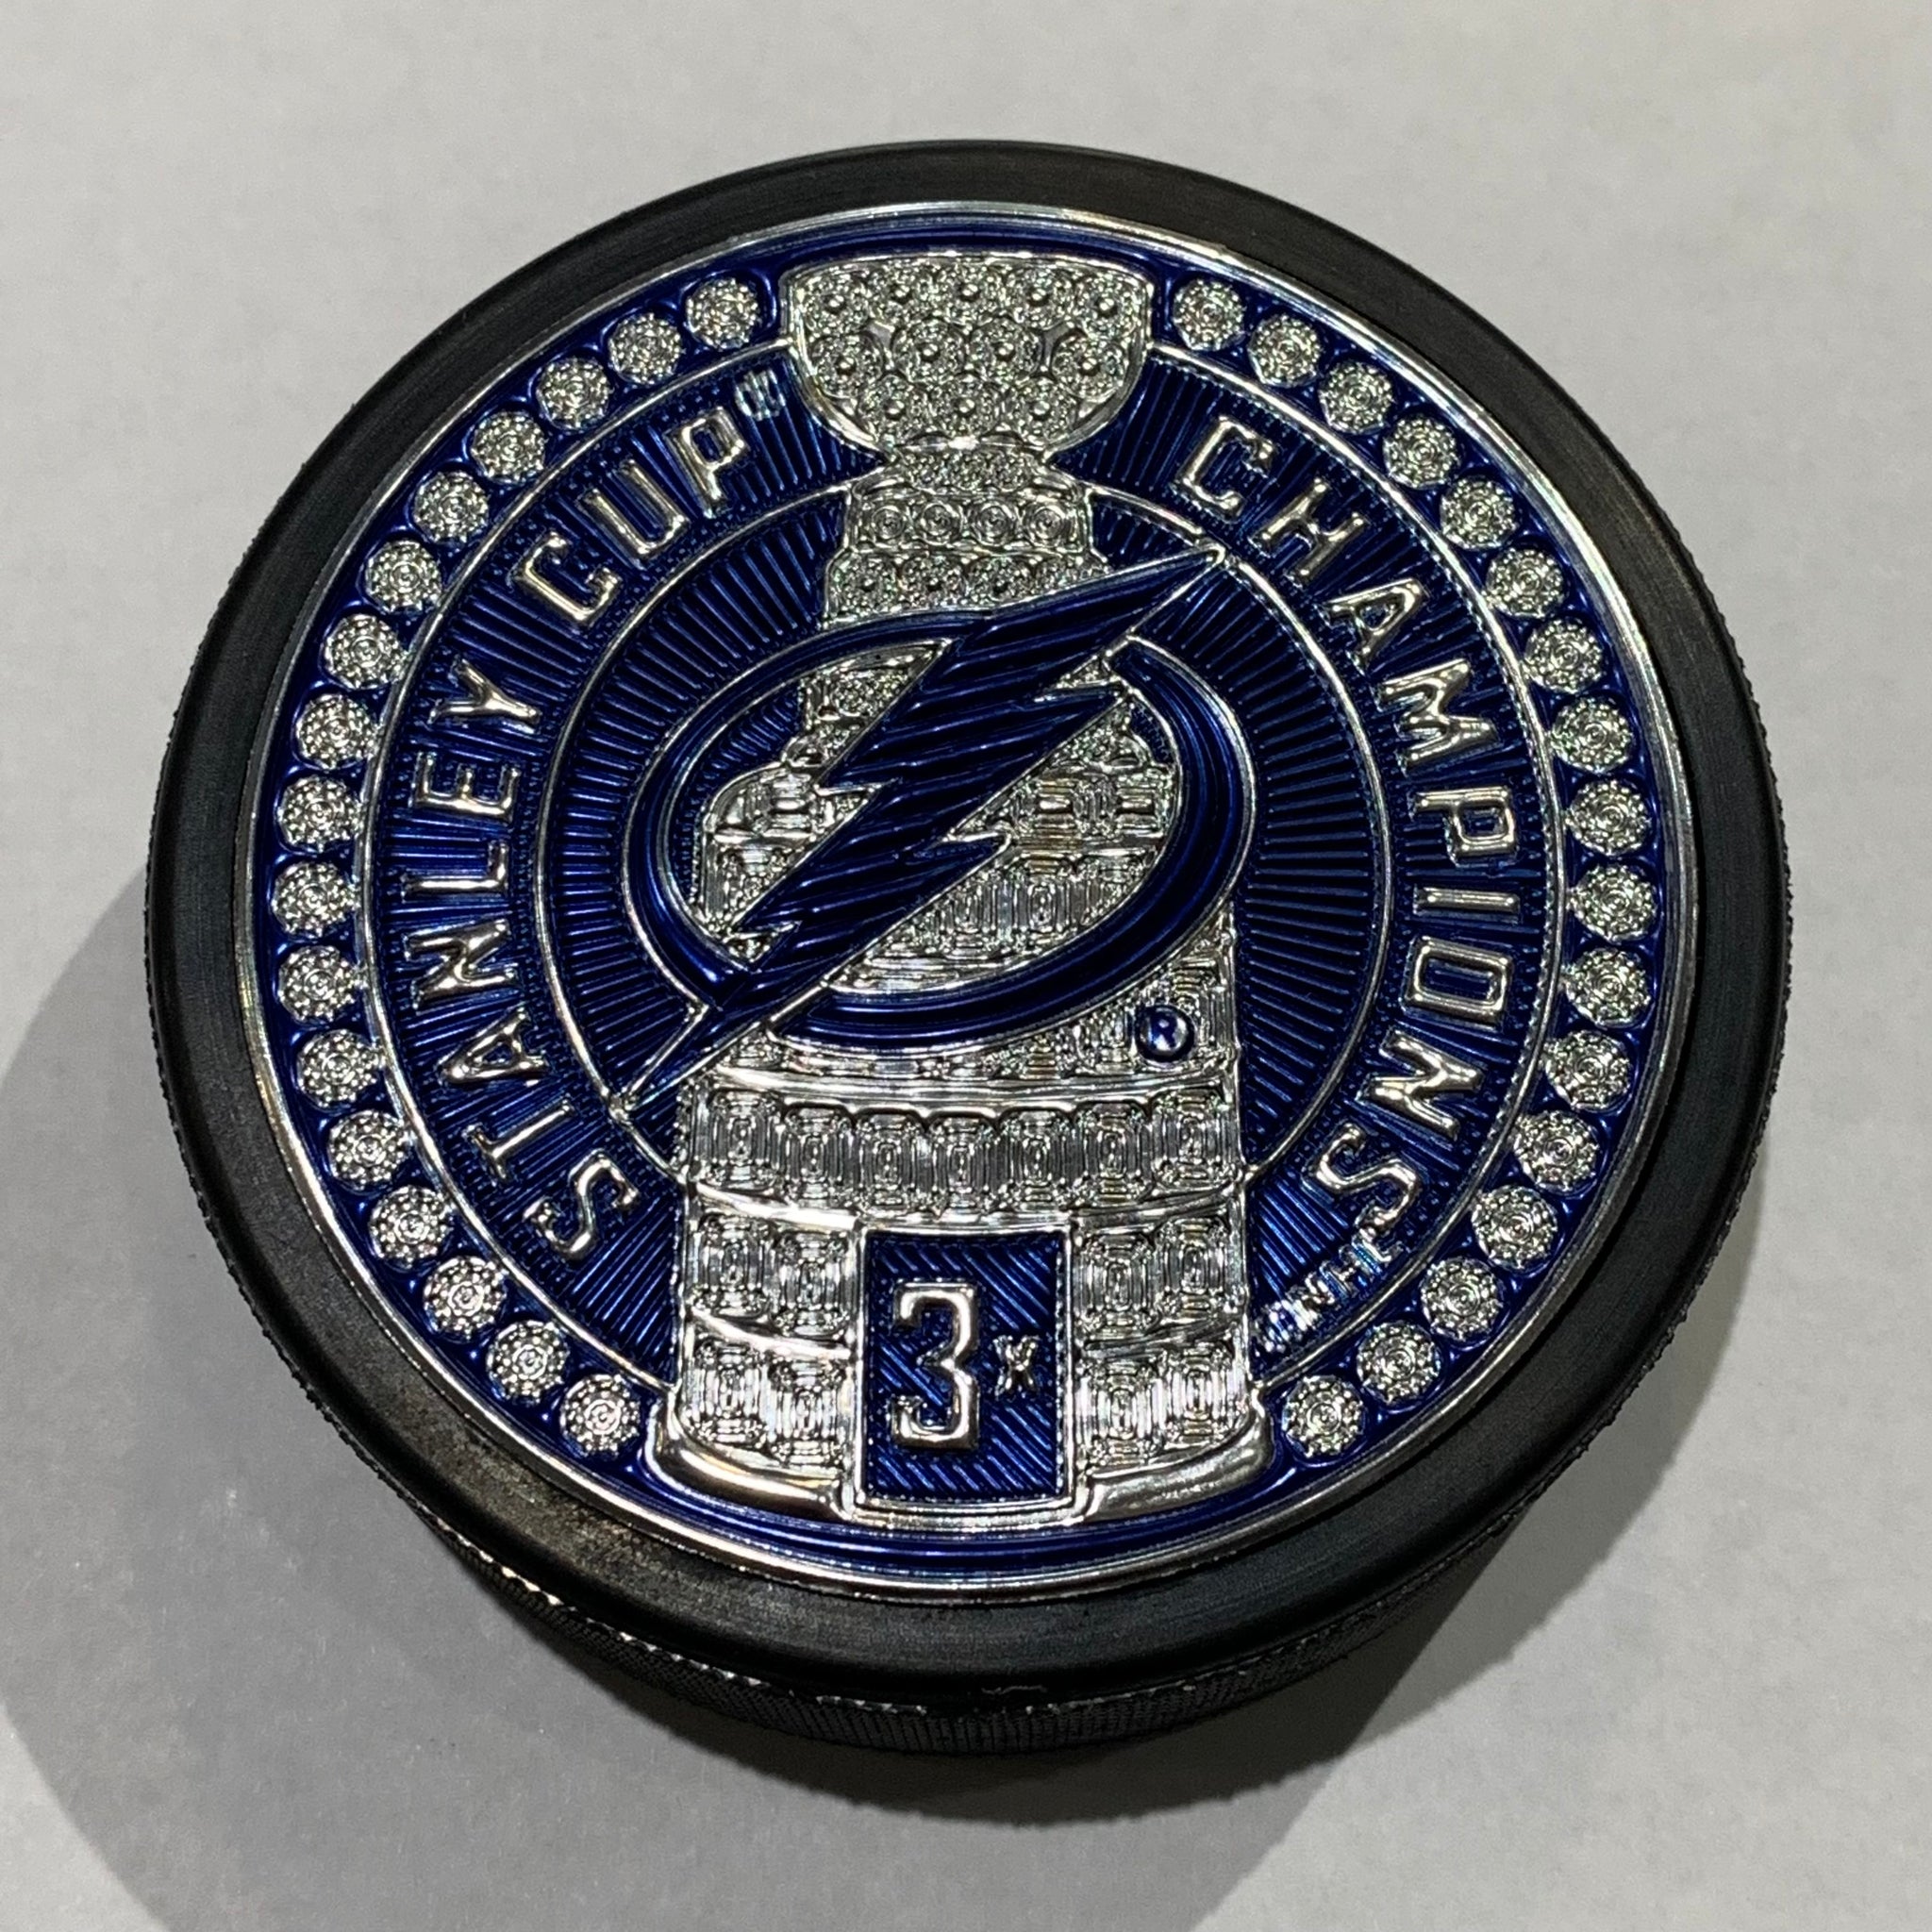 Tampa Bay Lighting 3x Stanley Cup Champions Puck